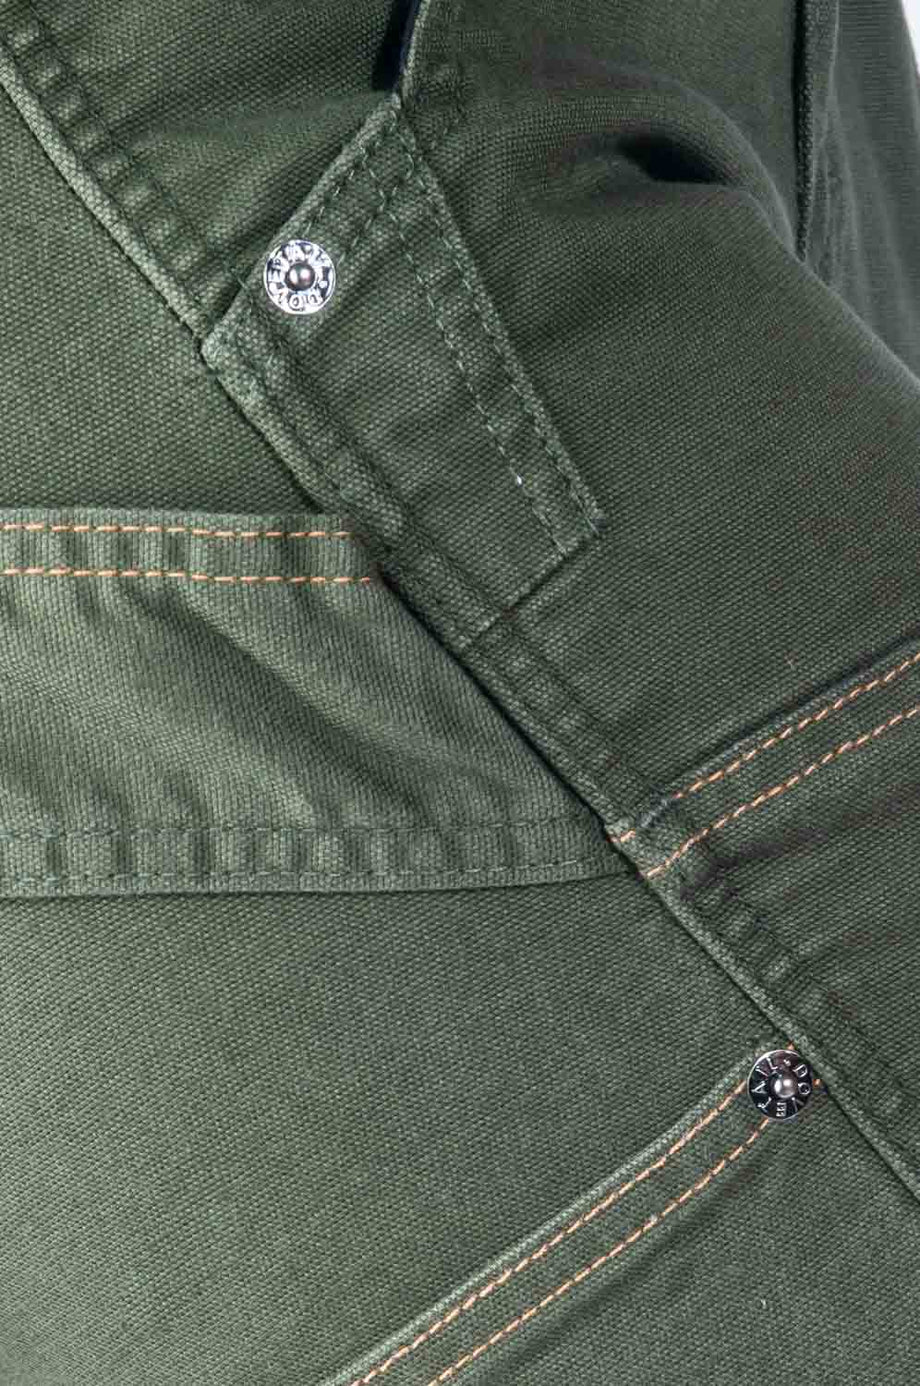 Maven X in Moss Green Canvas – Dovetail Workwear